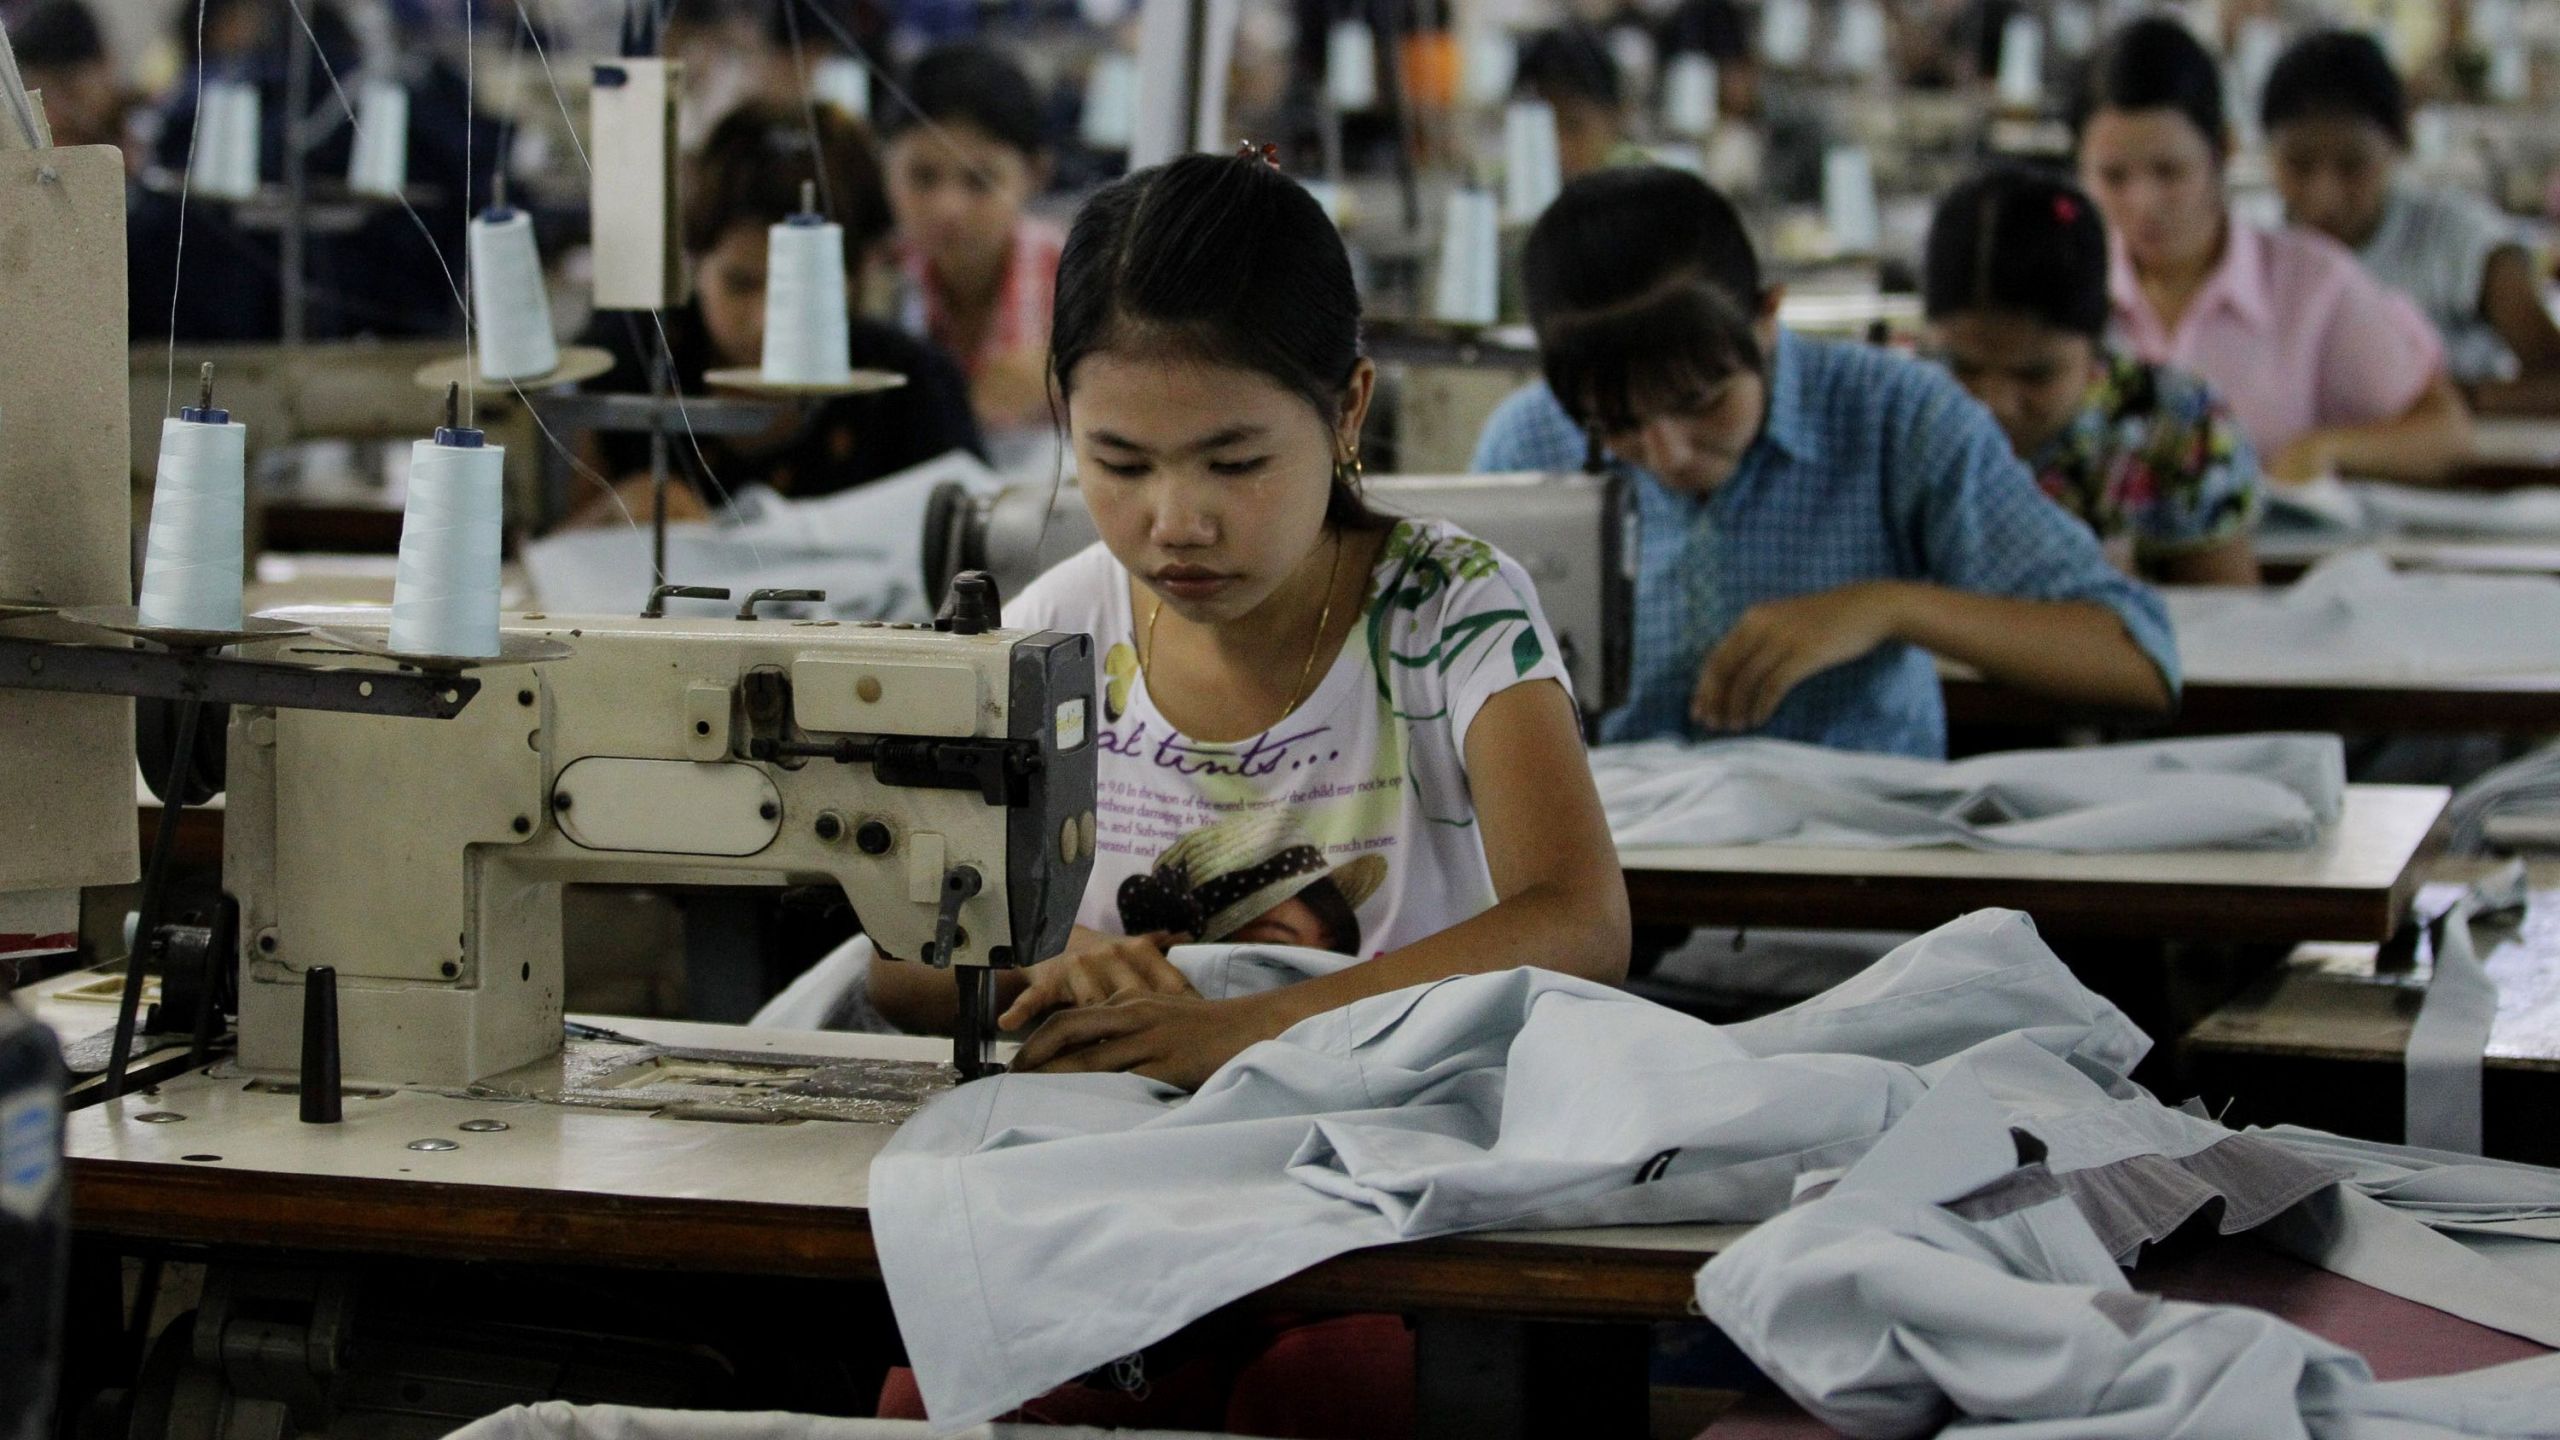 The Best Ideas for Child Labor In Fashion Industry - Home, Family ...